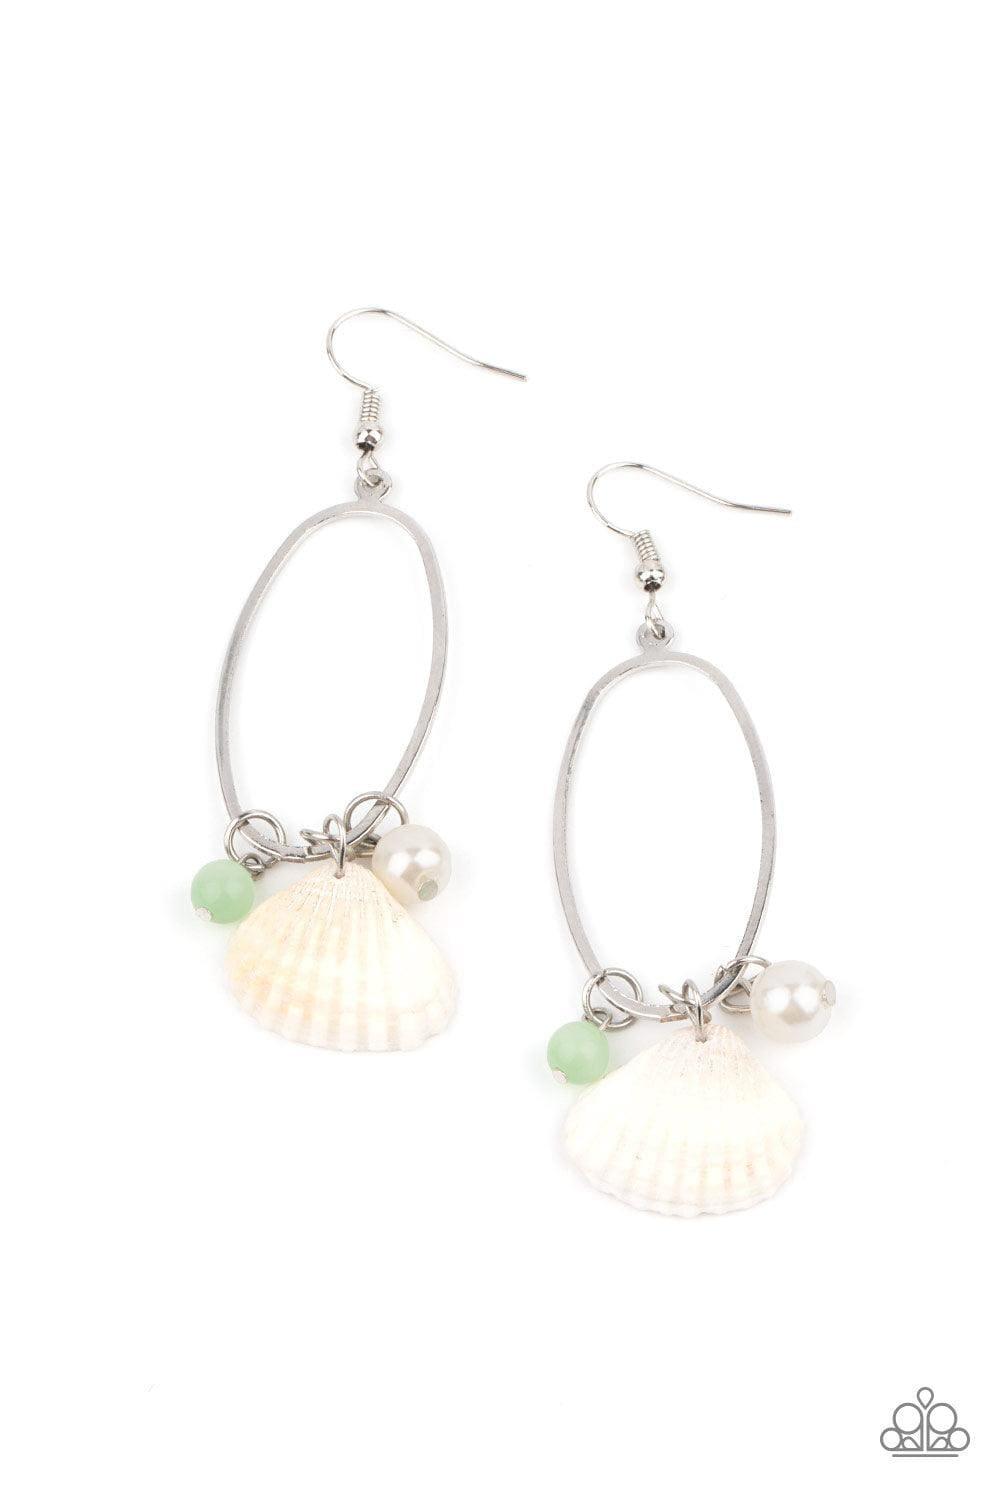 Paparazzi Accessories - This Too Shell Pass - Green Earrings - Bling by JessieK